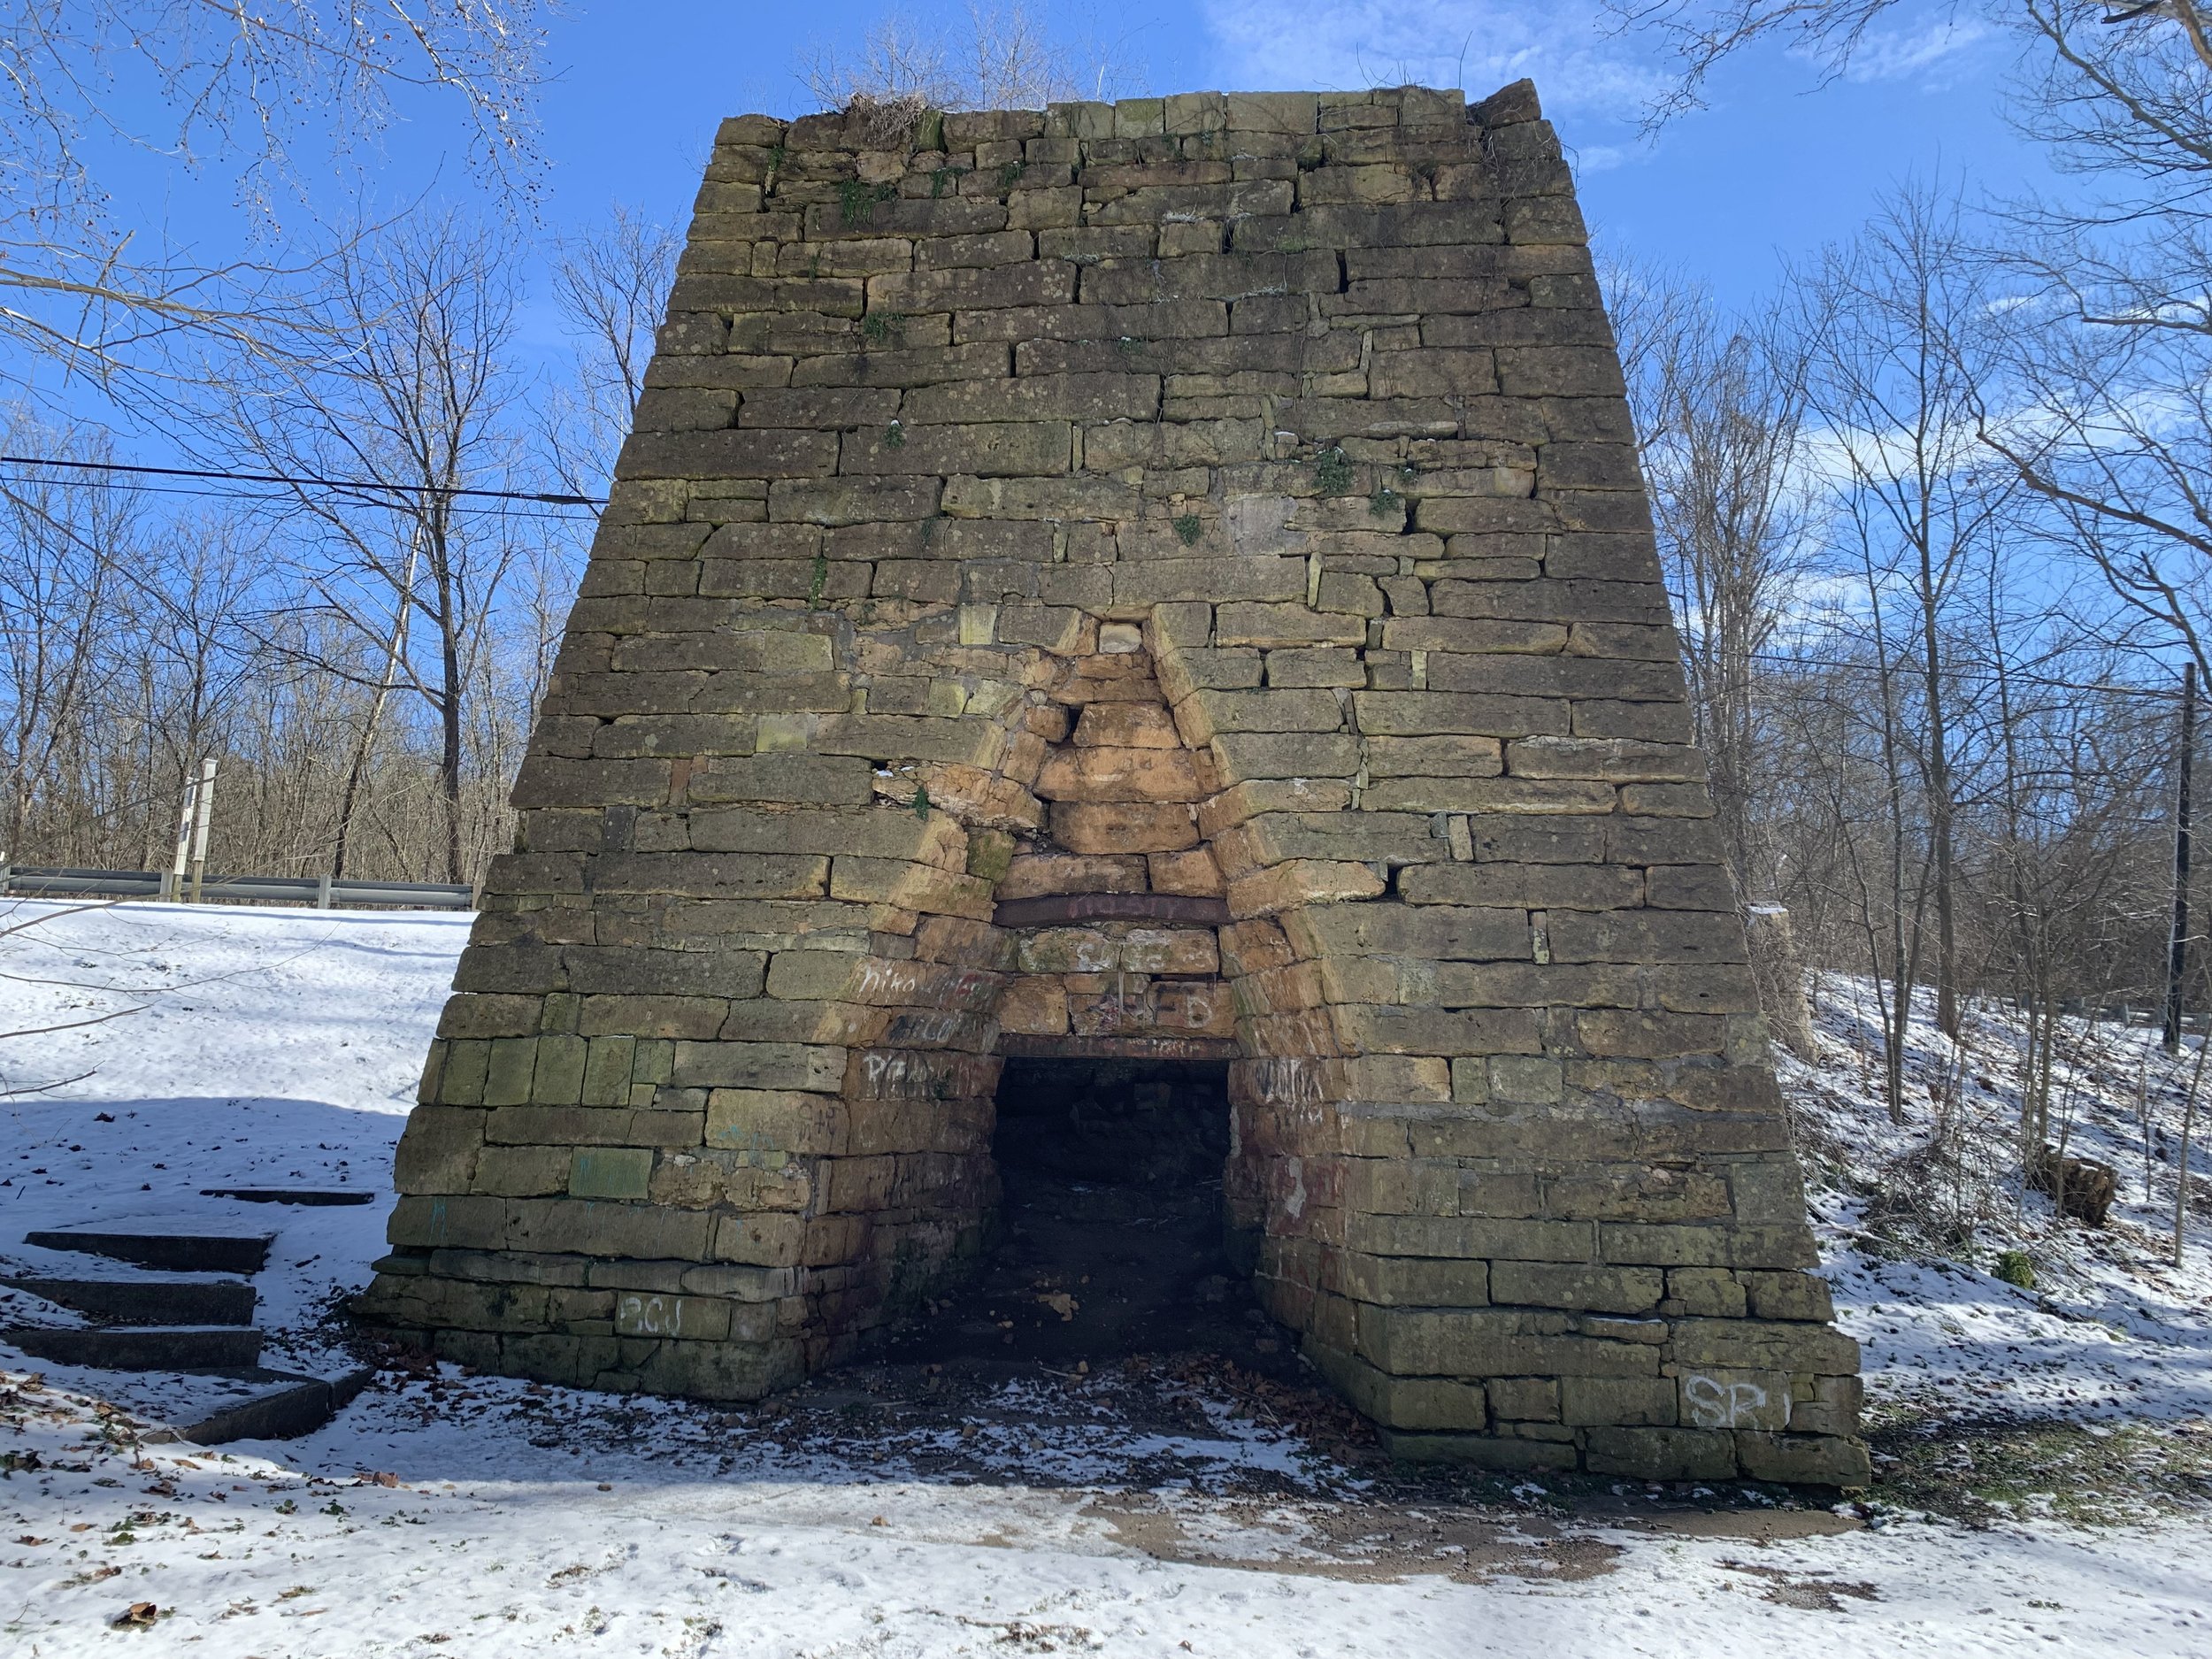 Side of the furnace showing the main opening